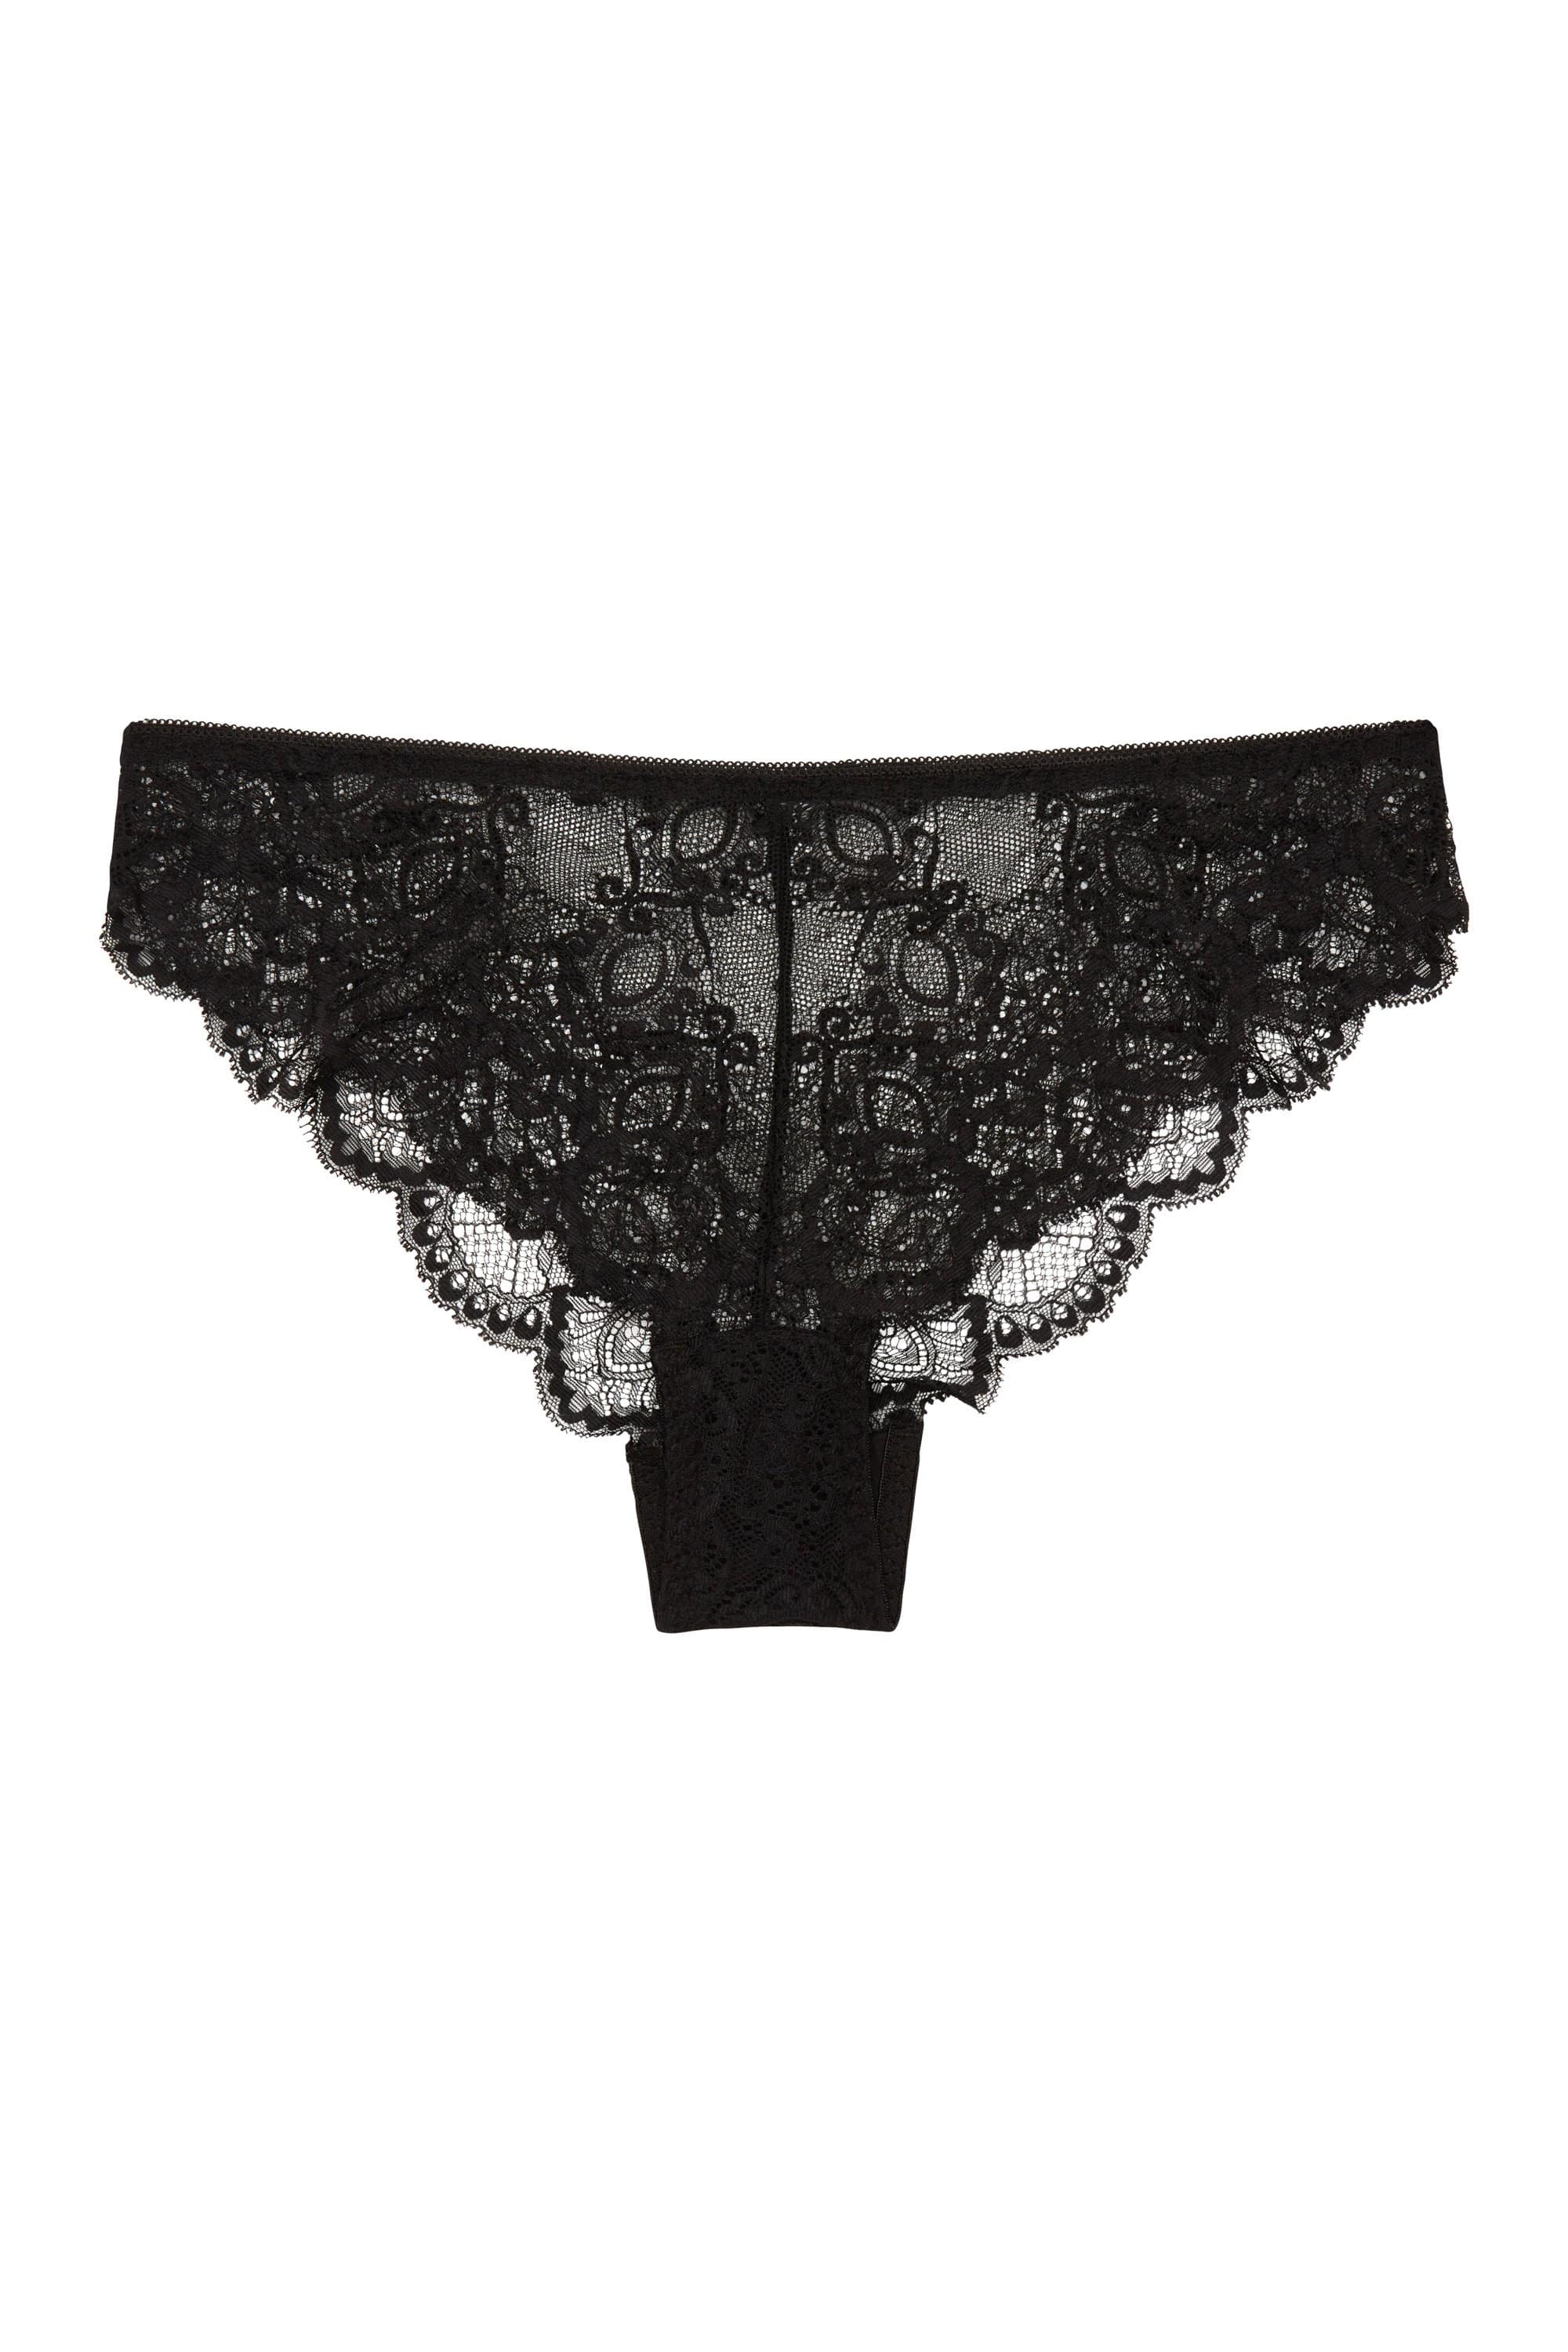 Wolf & Whistle Ariana Lace Brief Black